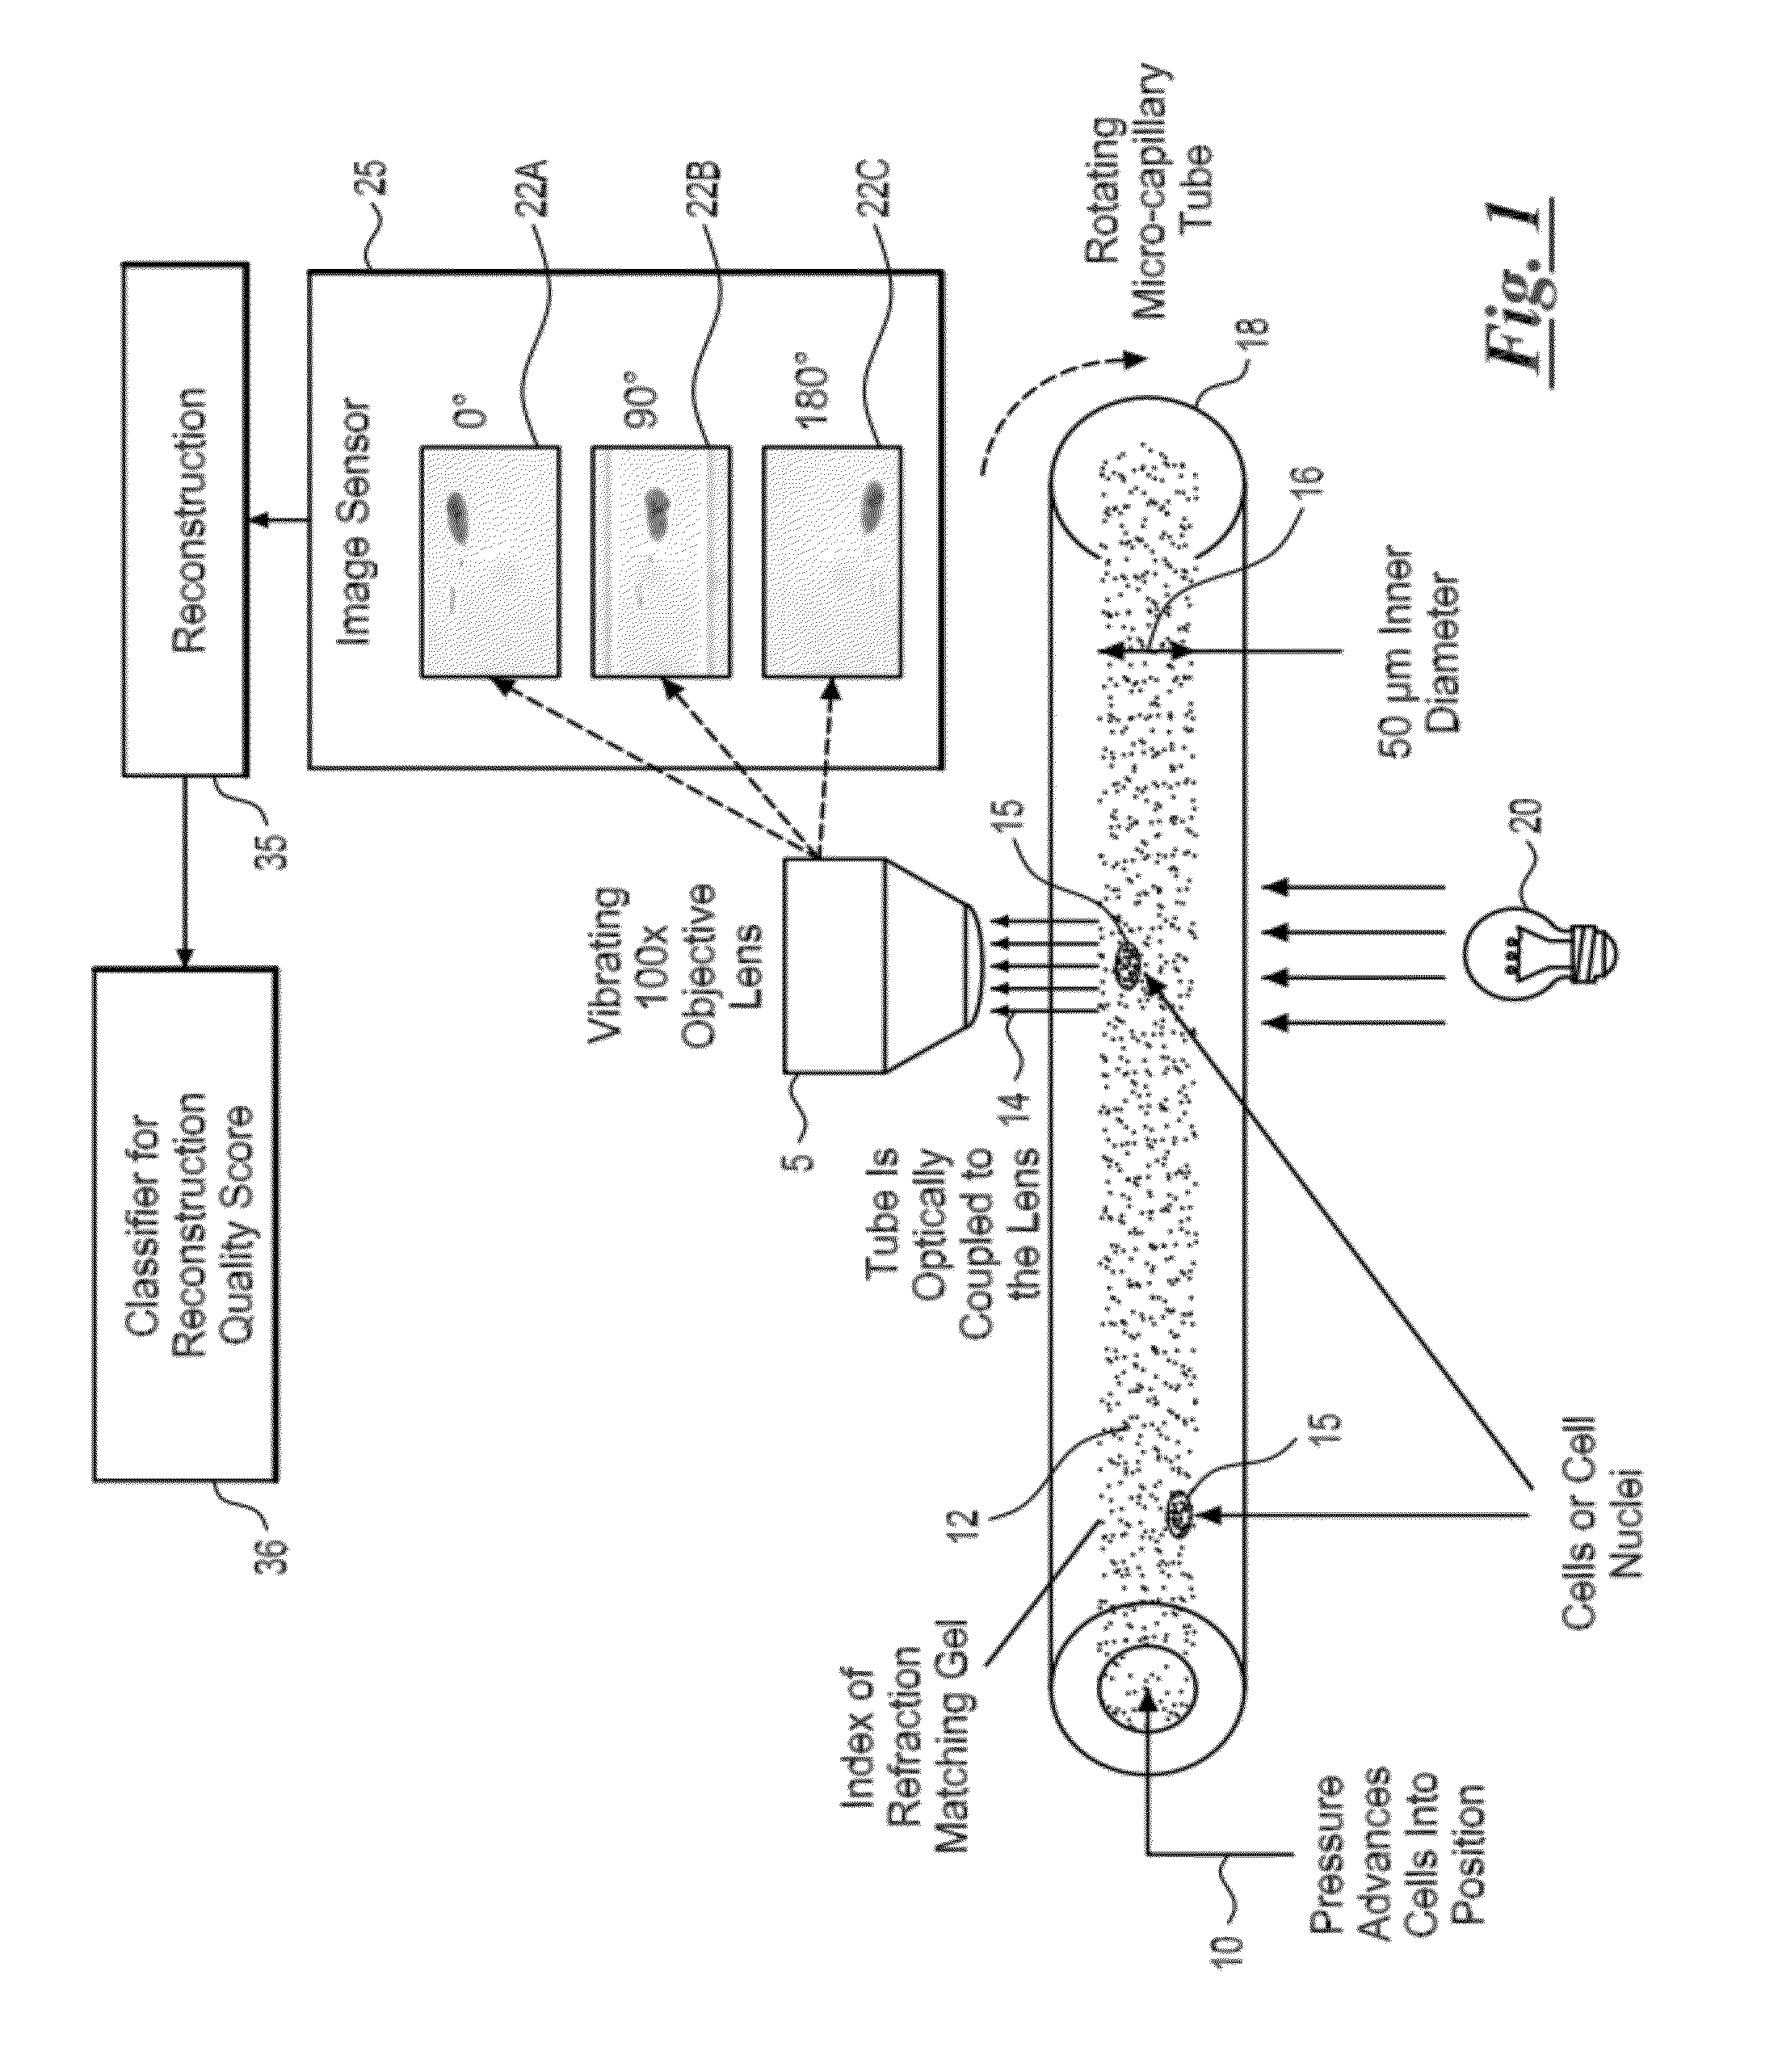 System and method for detecting poor quality in 3D reconstructions